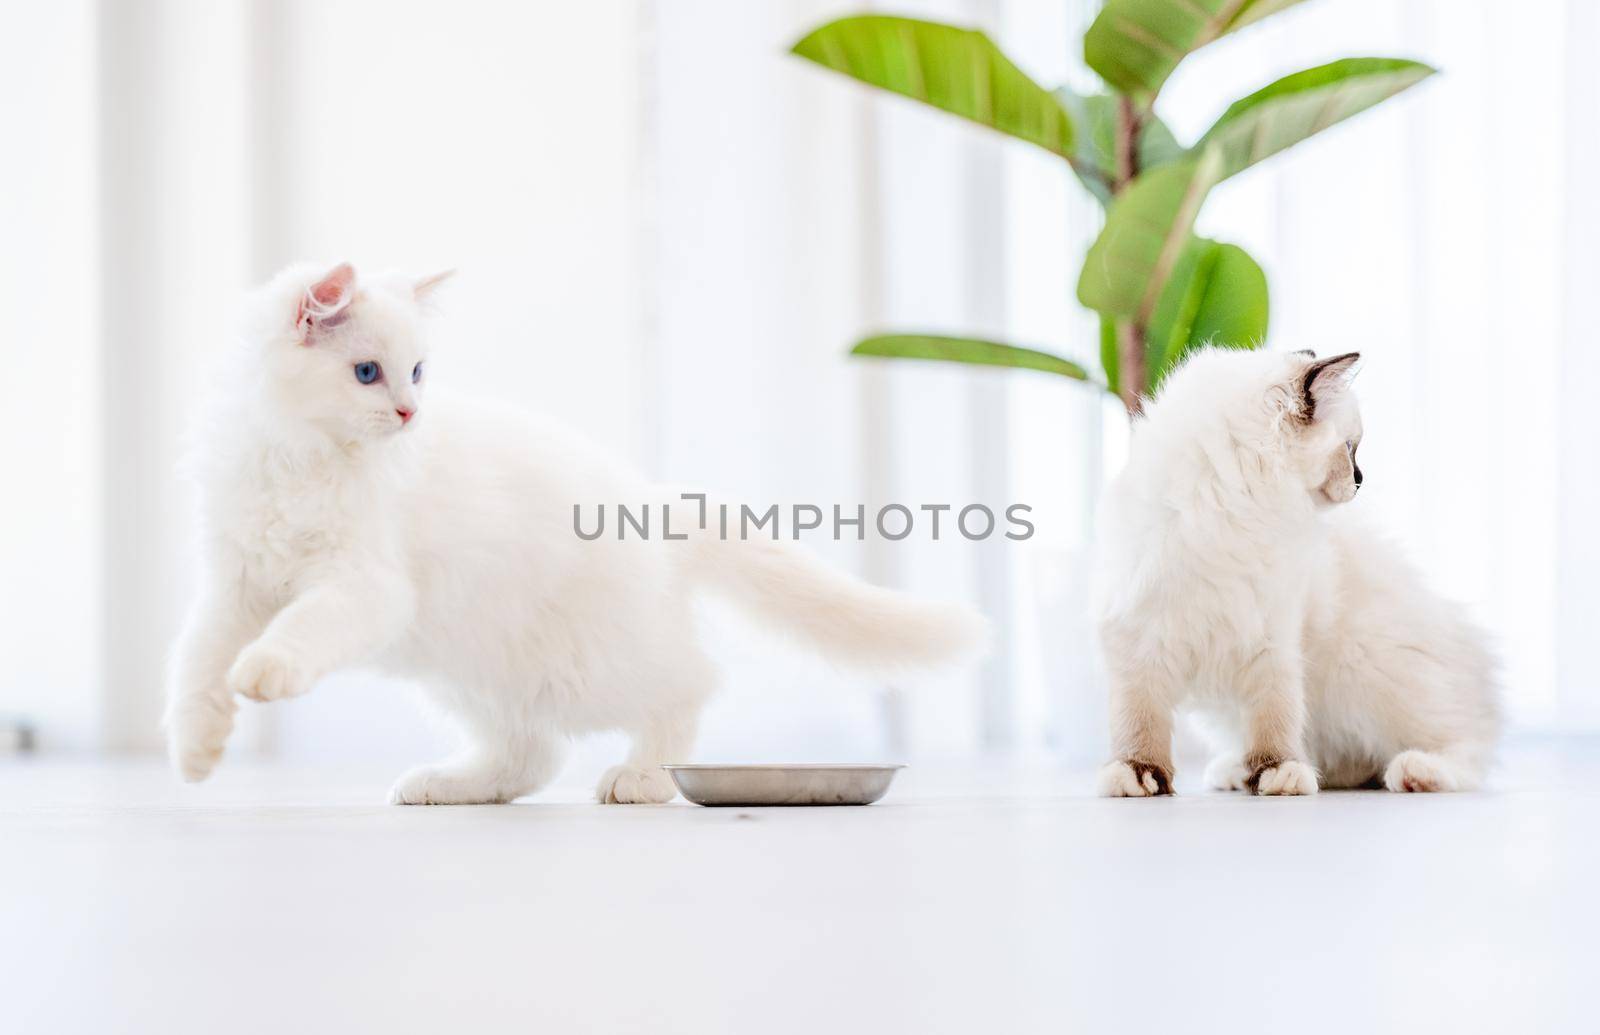 Two lovely fluffy white ragdoll cats standing close to bowl after eating feed in light room with green plant on background. Pair of beautiful purebred feline pets outdoors with food